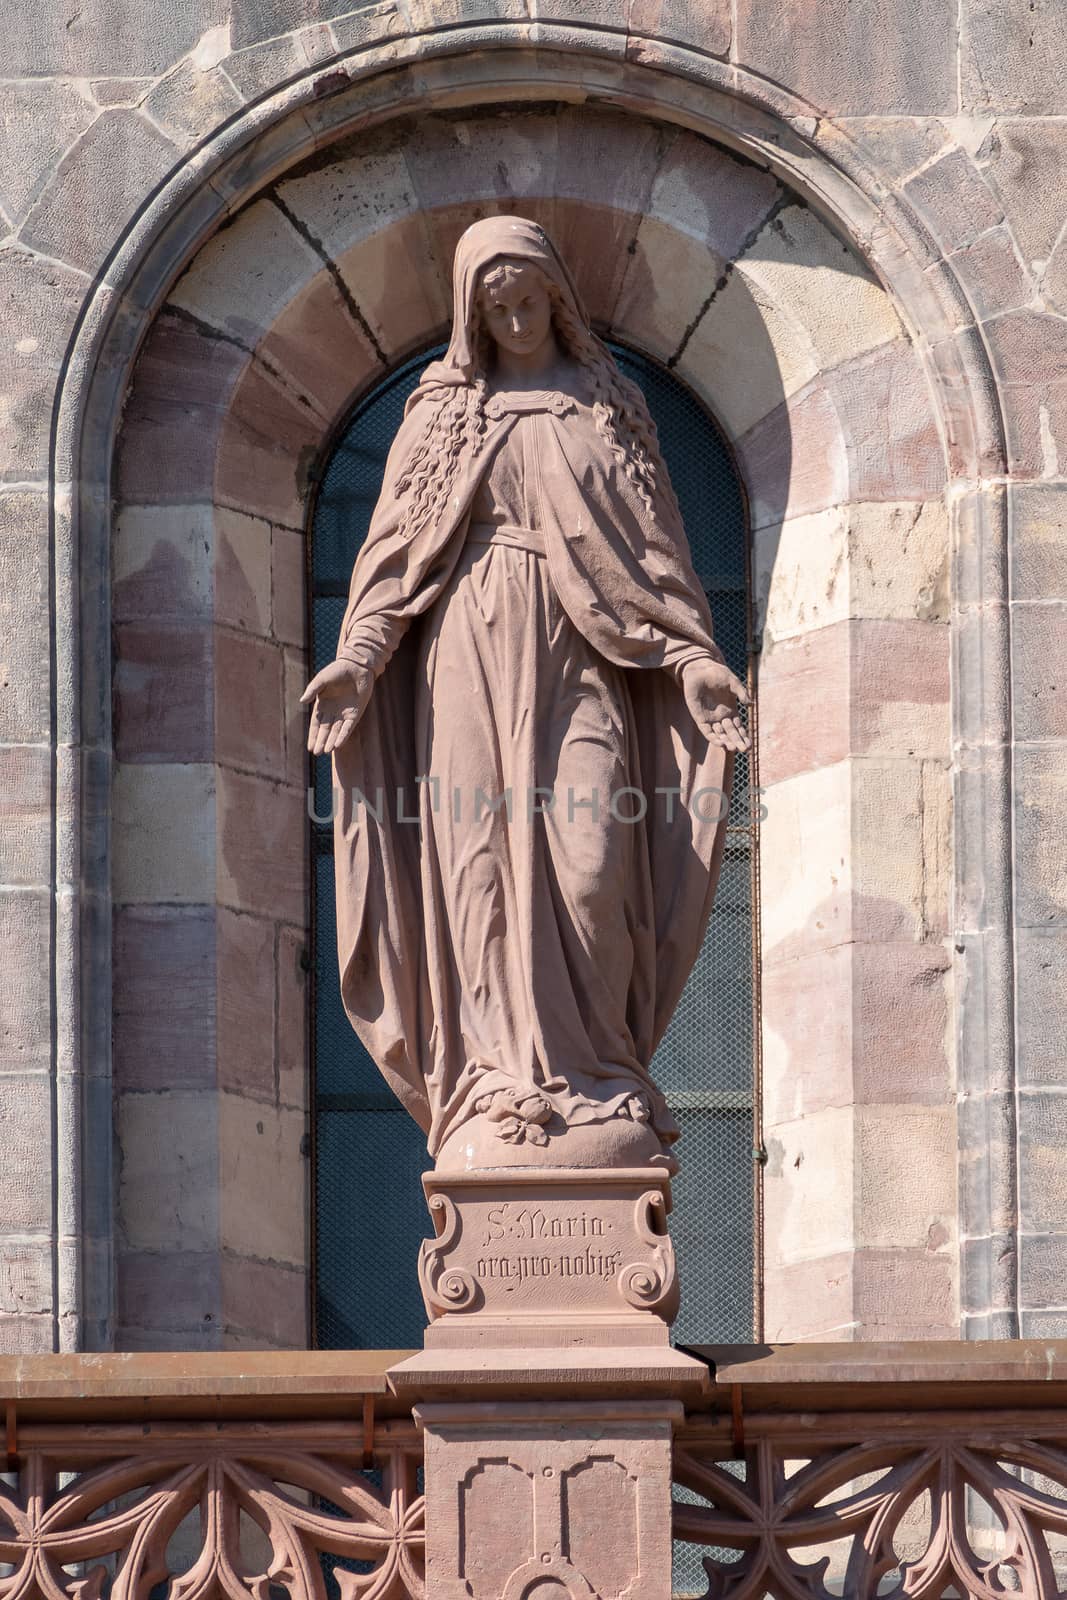 An image of the Mary statue at Freiburg Muenster Germany